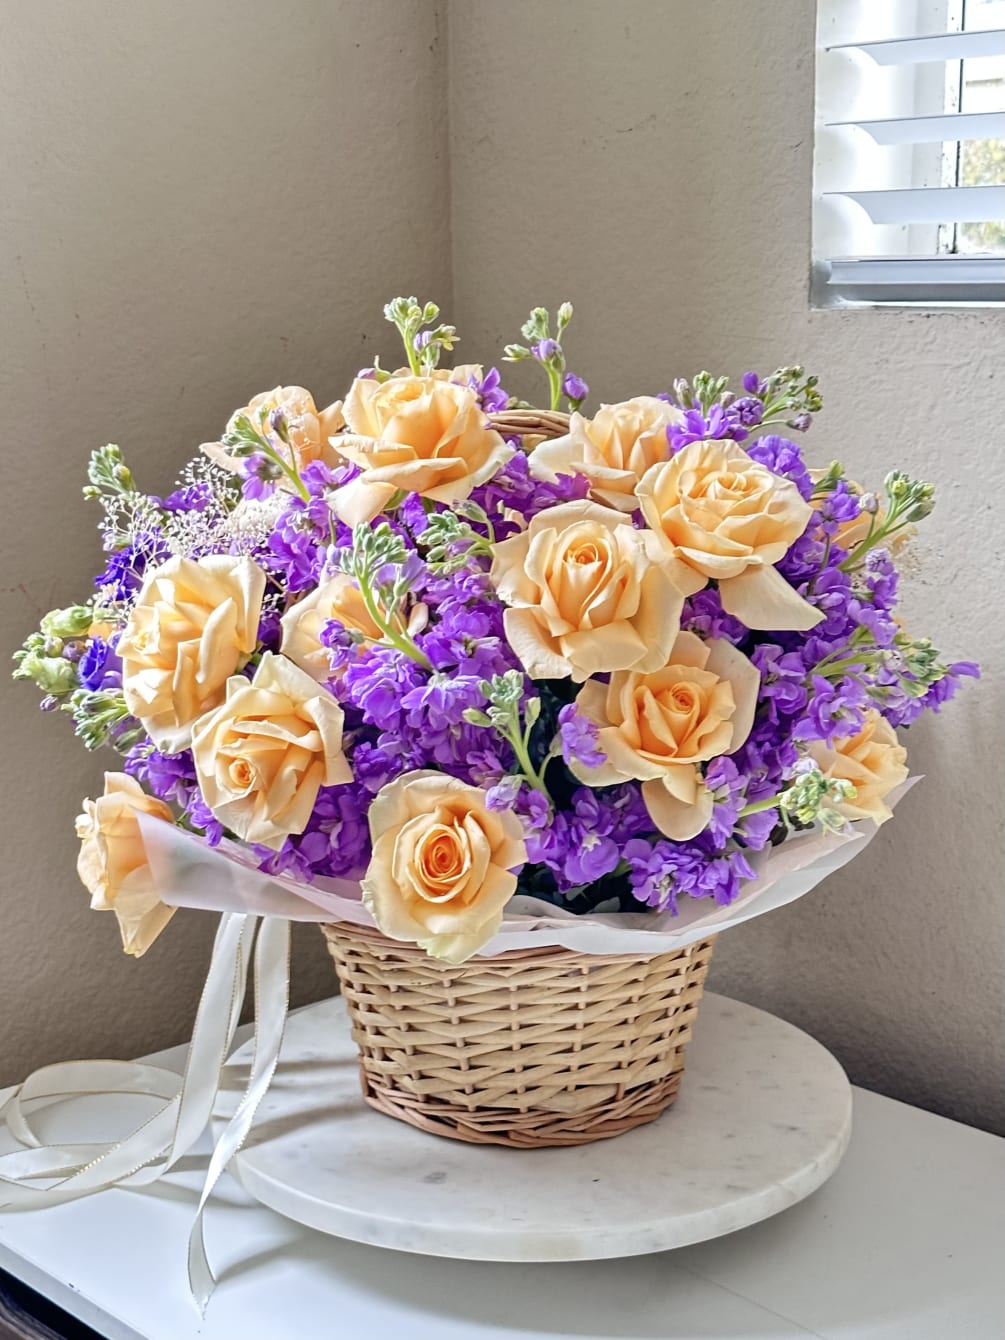  This charming arrangement of fragrant tender matthiolas and delicate peach roses